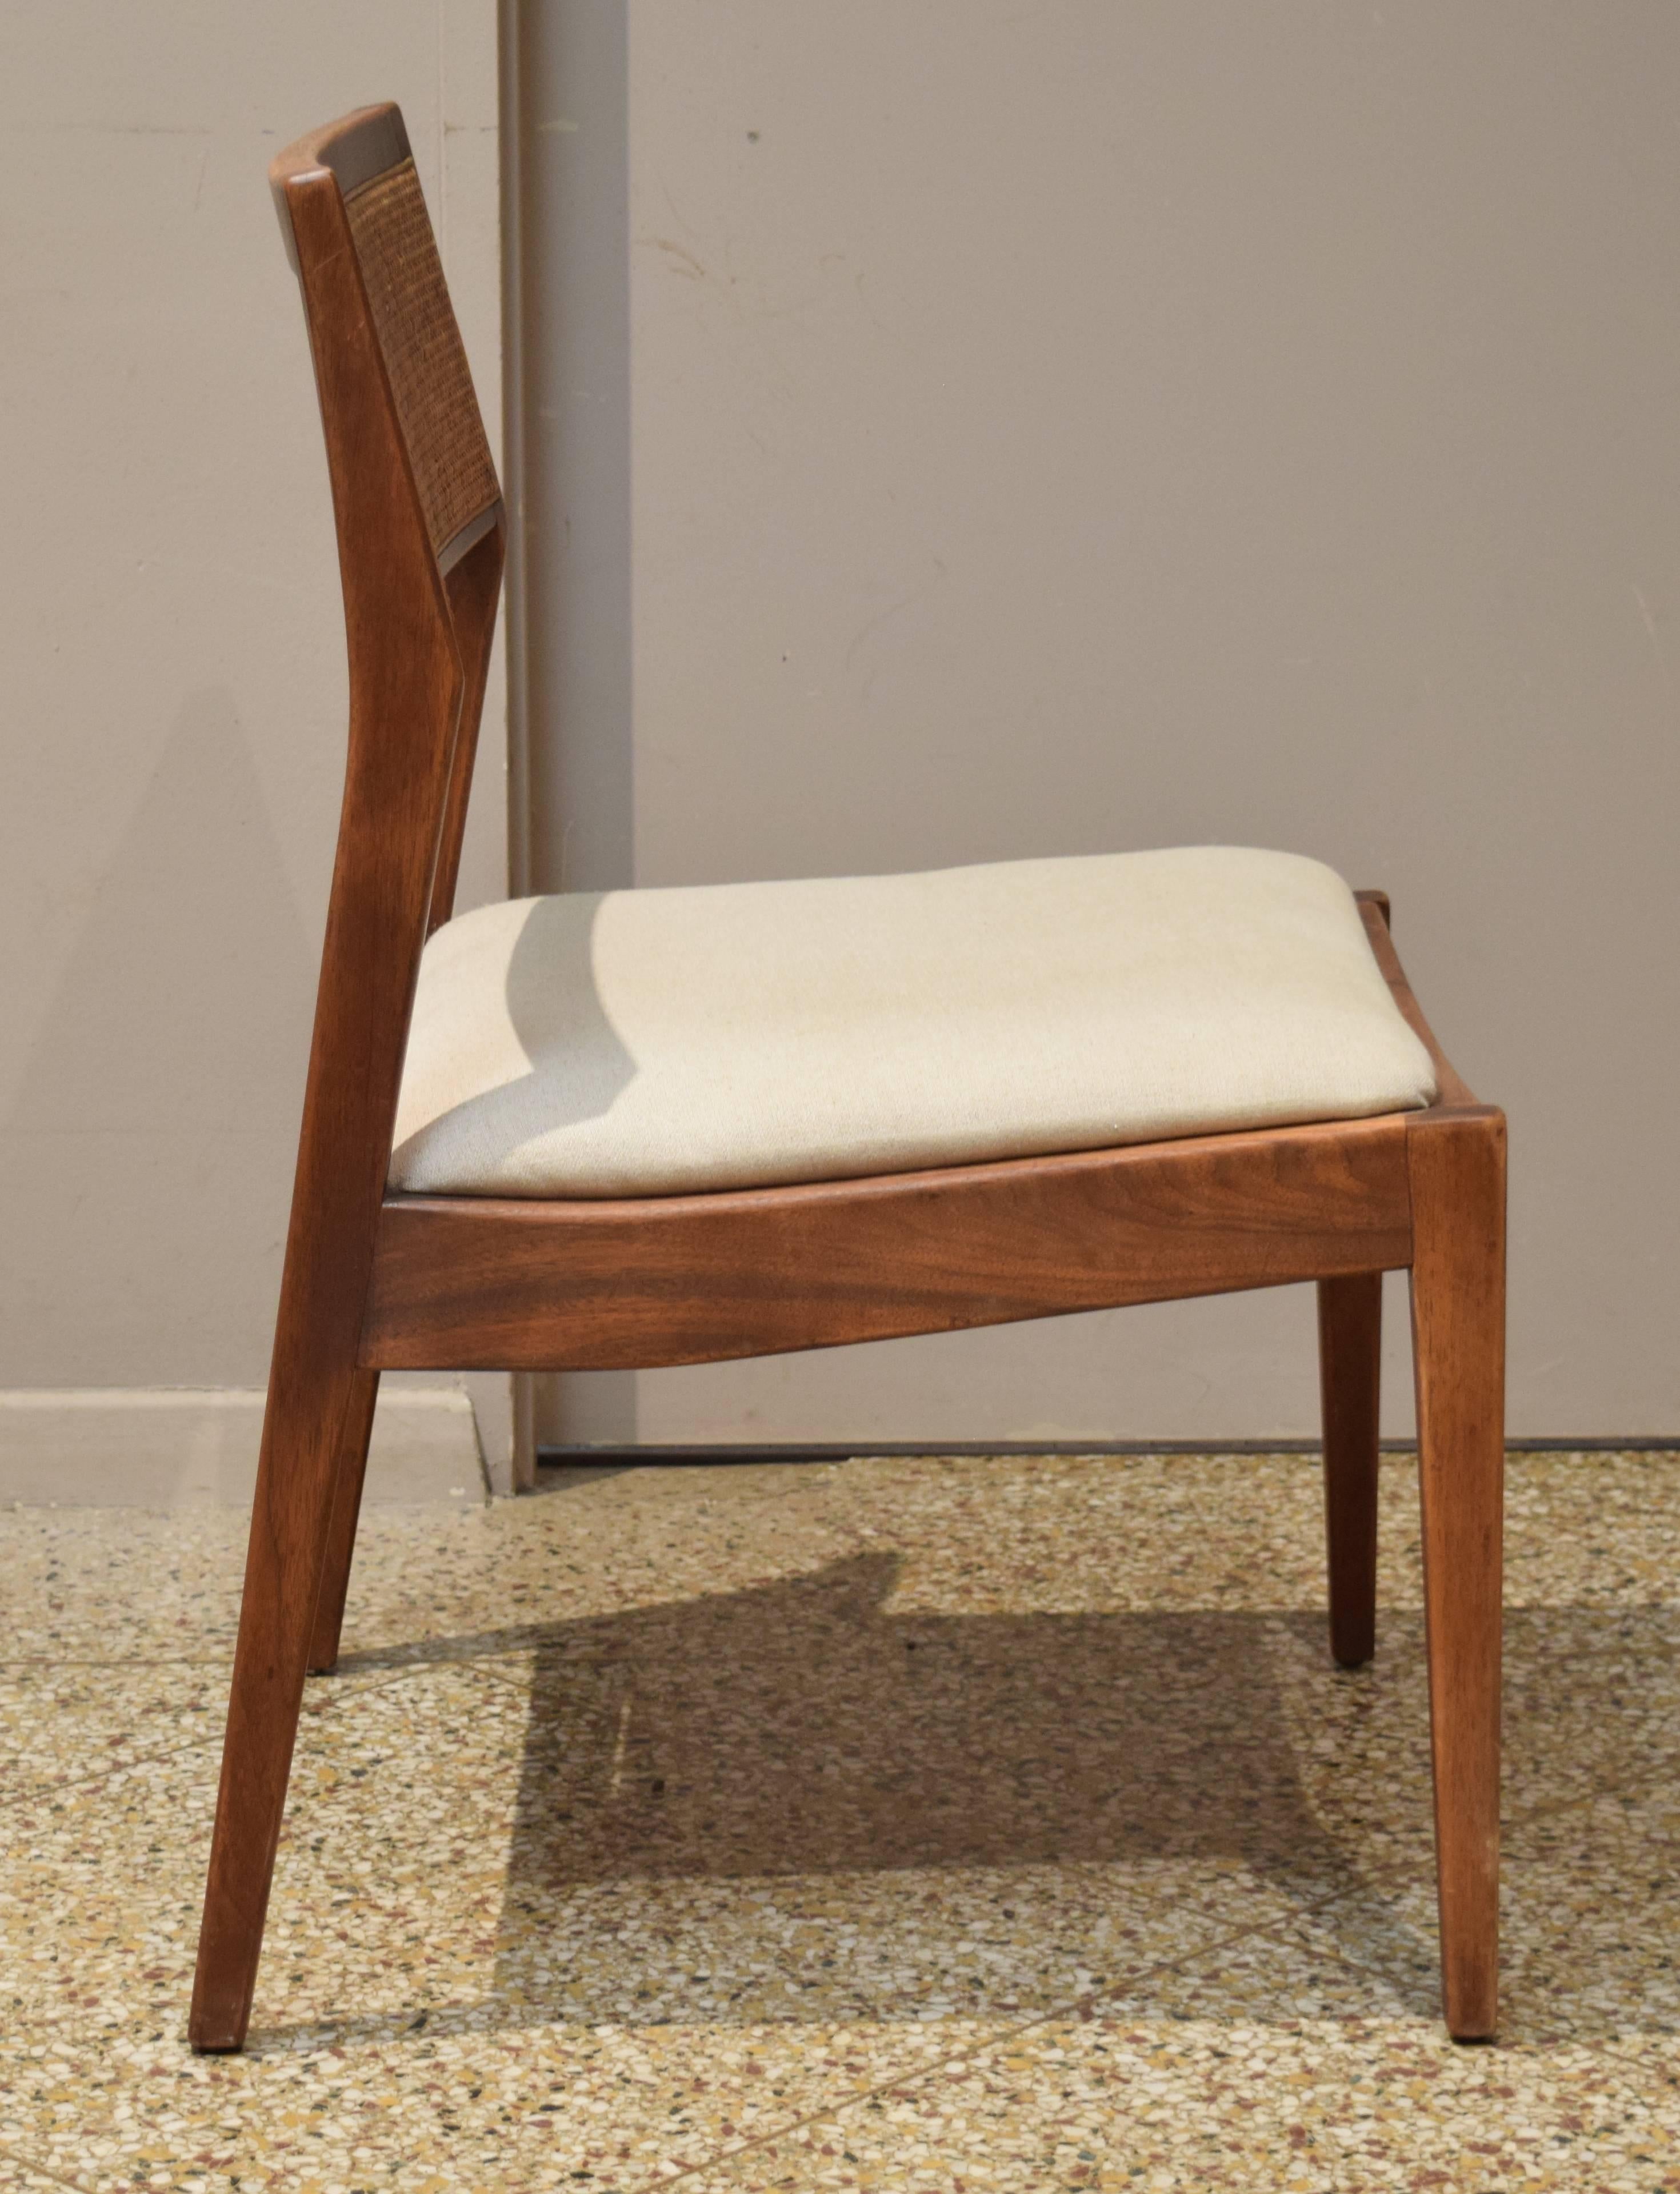 Store closing-- last day is 7/31. Offers welcome! Sculpted walnut side chair with caned backrest by Jens Risom.